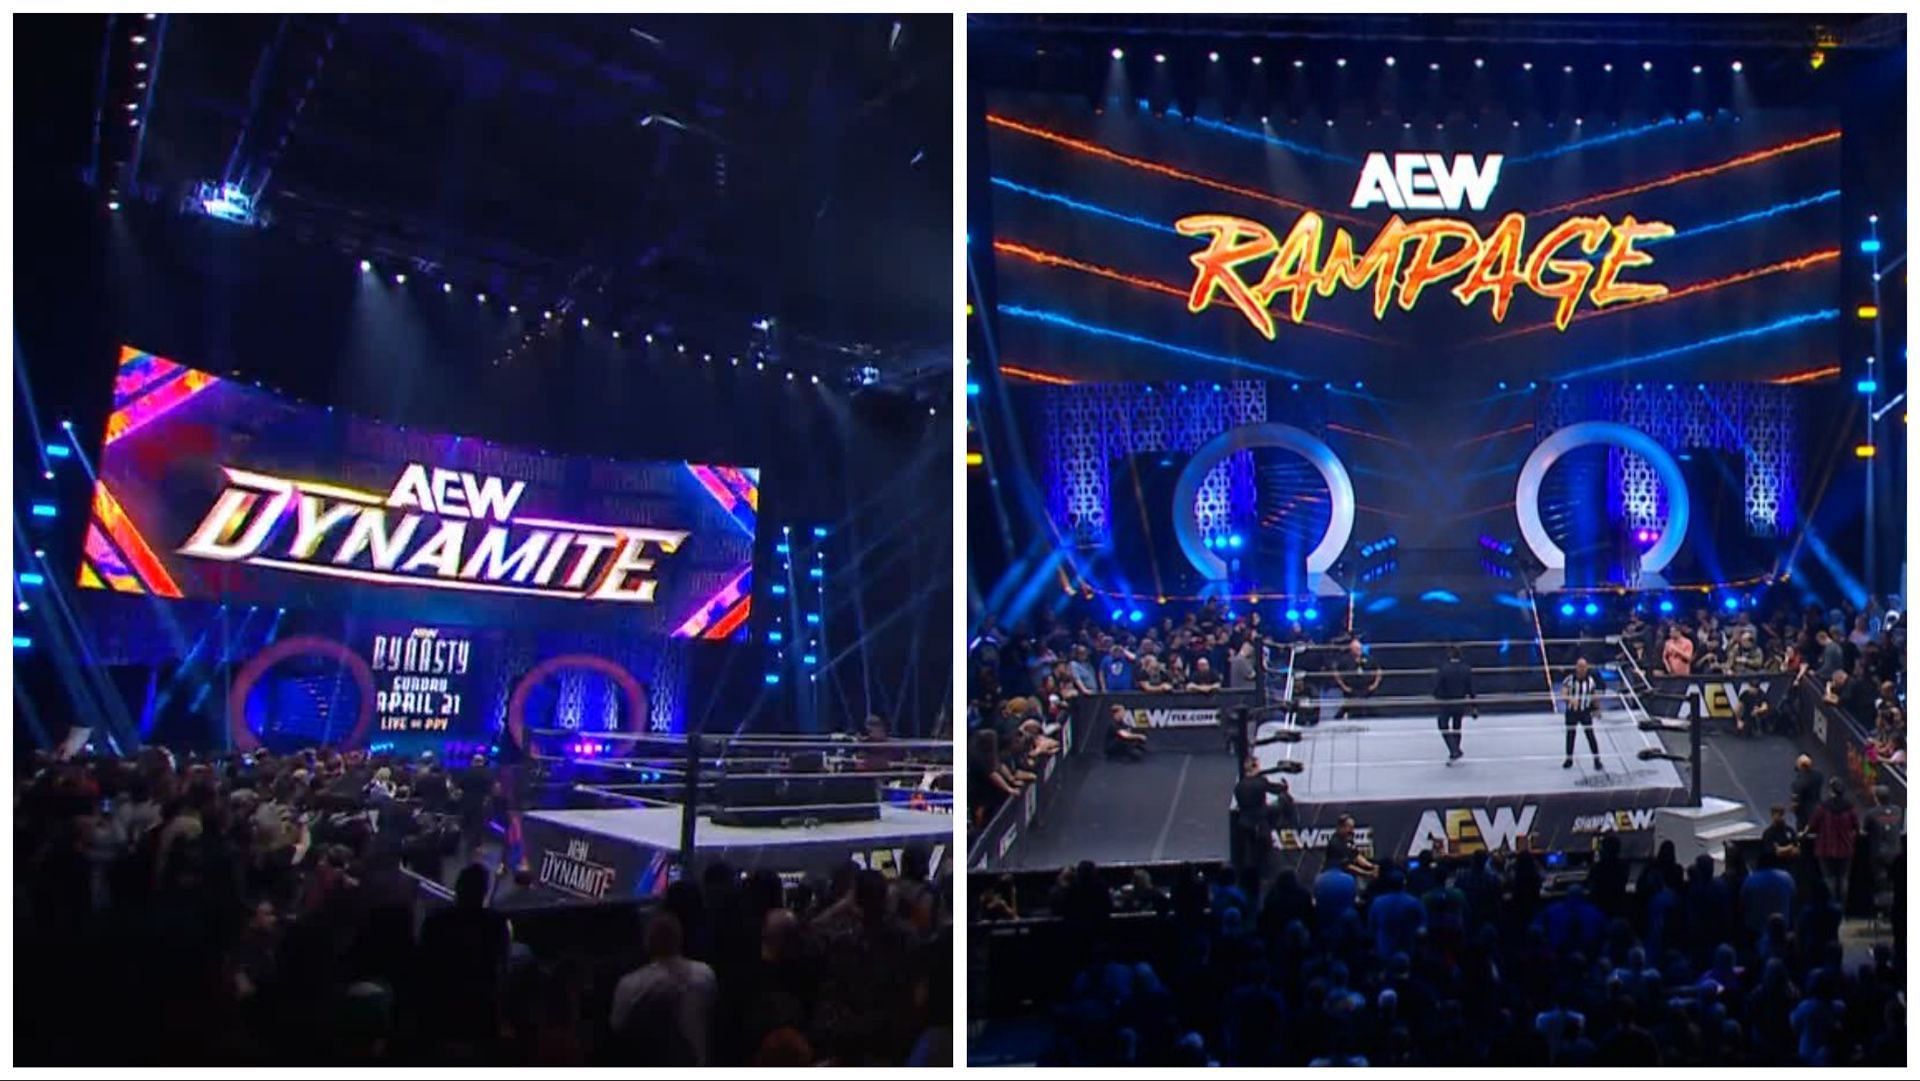 AEW fans pack their local arenas for Dynamite and Rampage